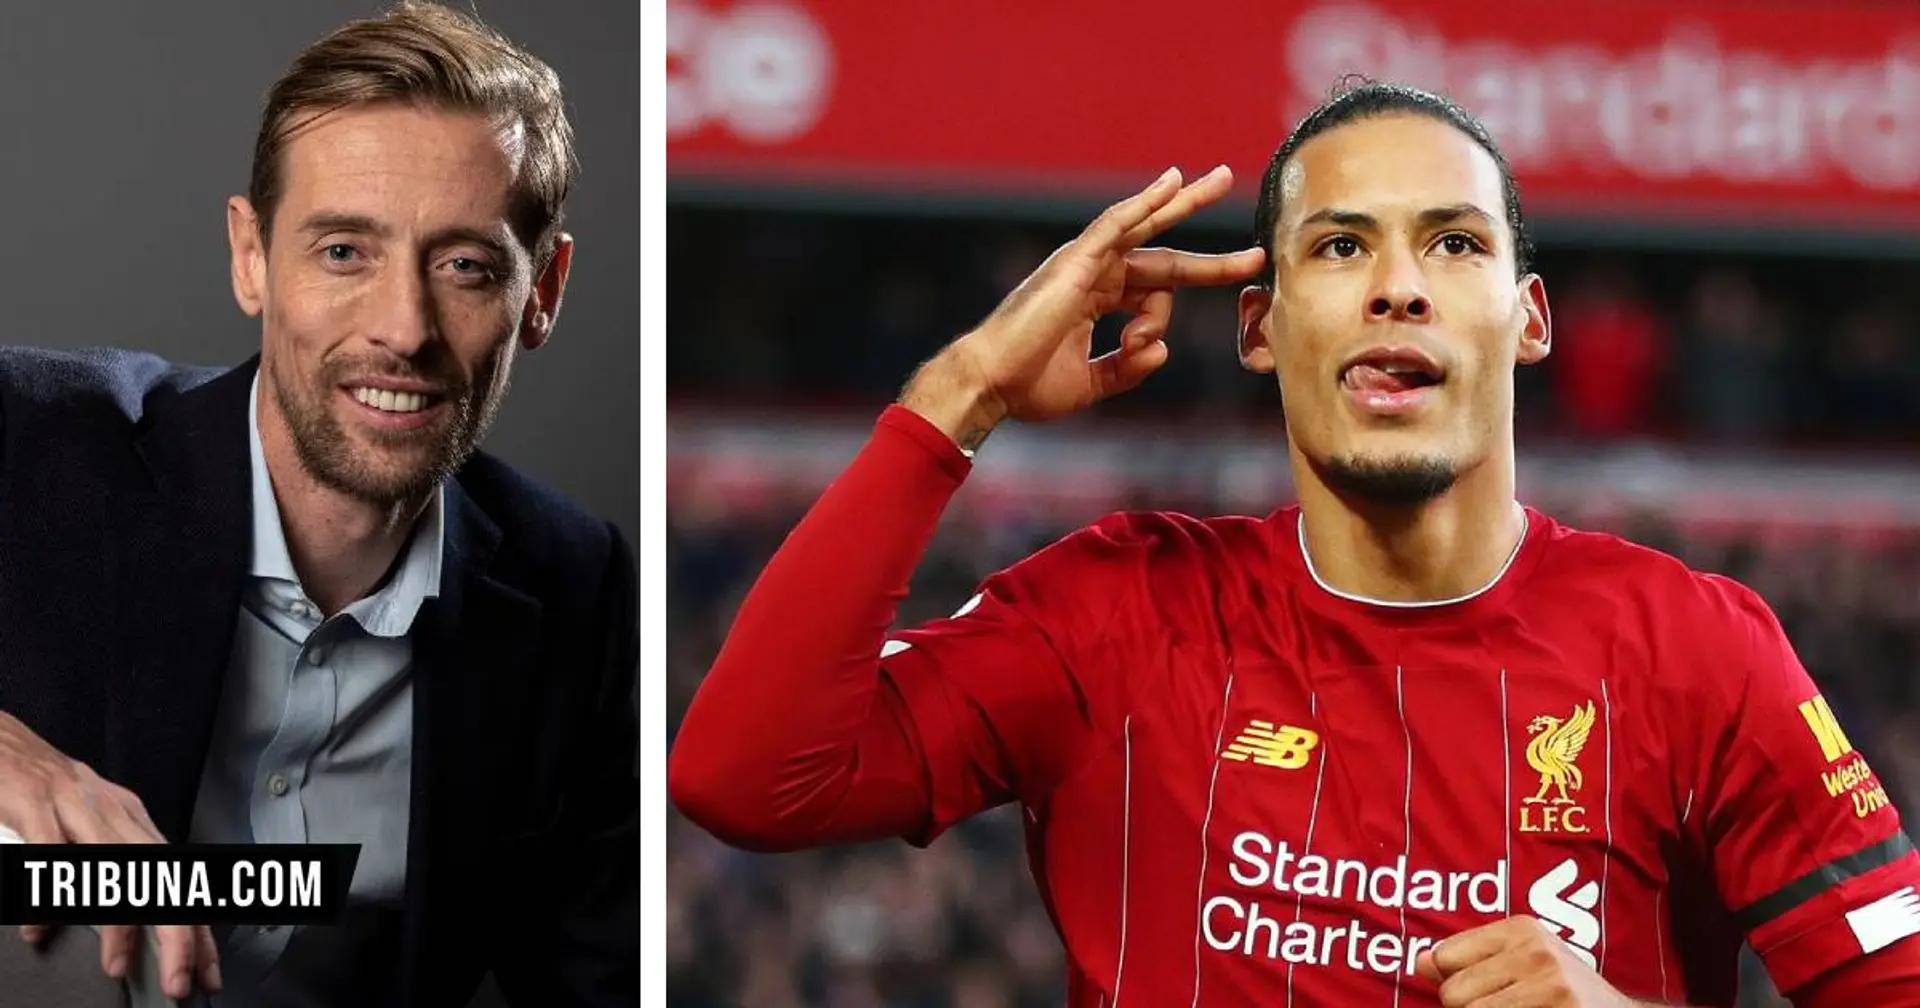 Crouch completely exposes Van Dijk's stat about goal-leading errors: Here's why the information is misleading